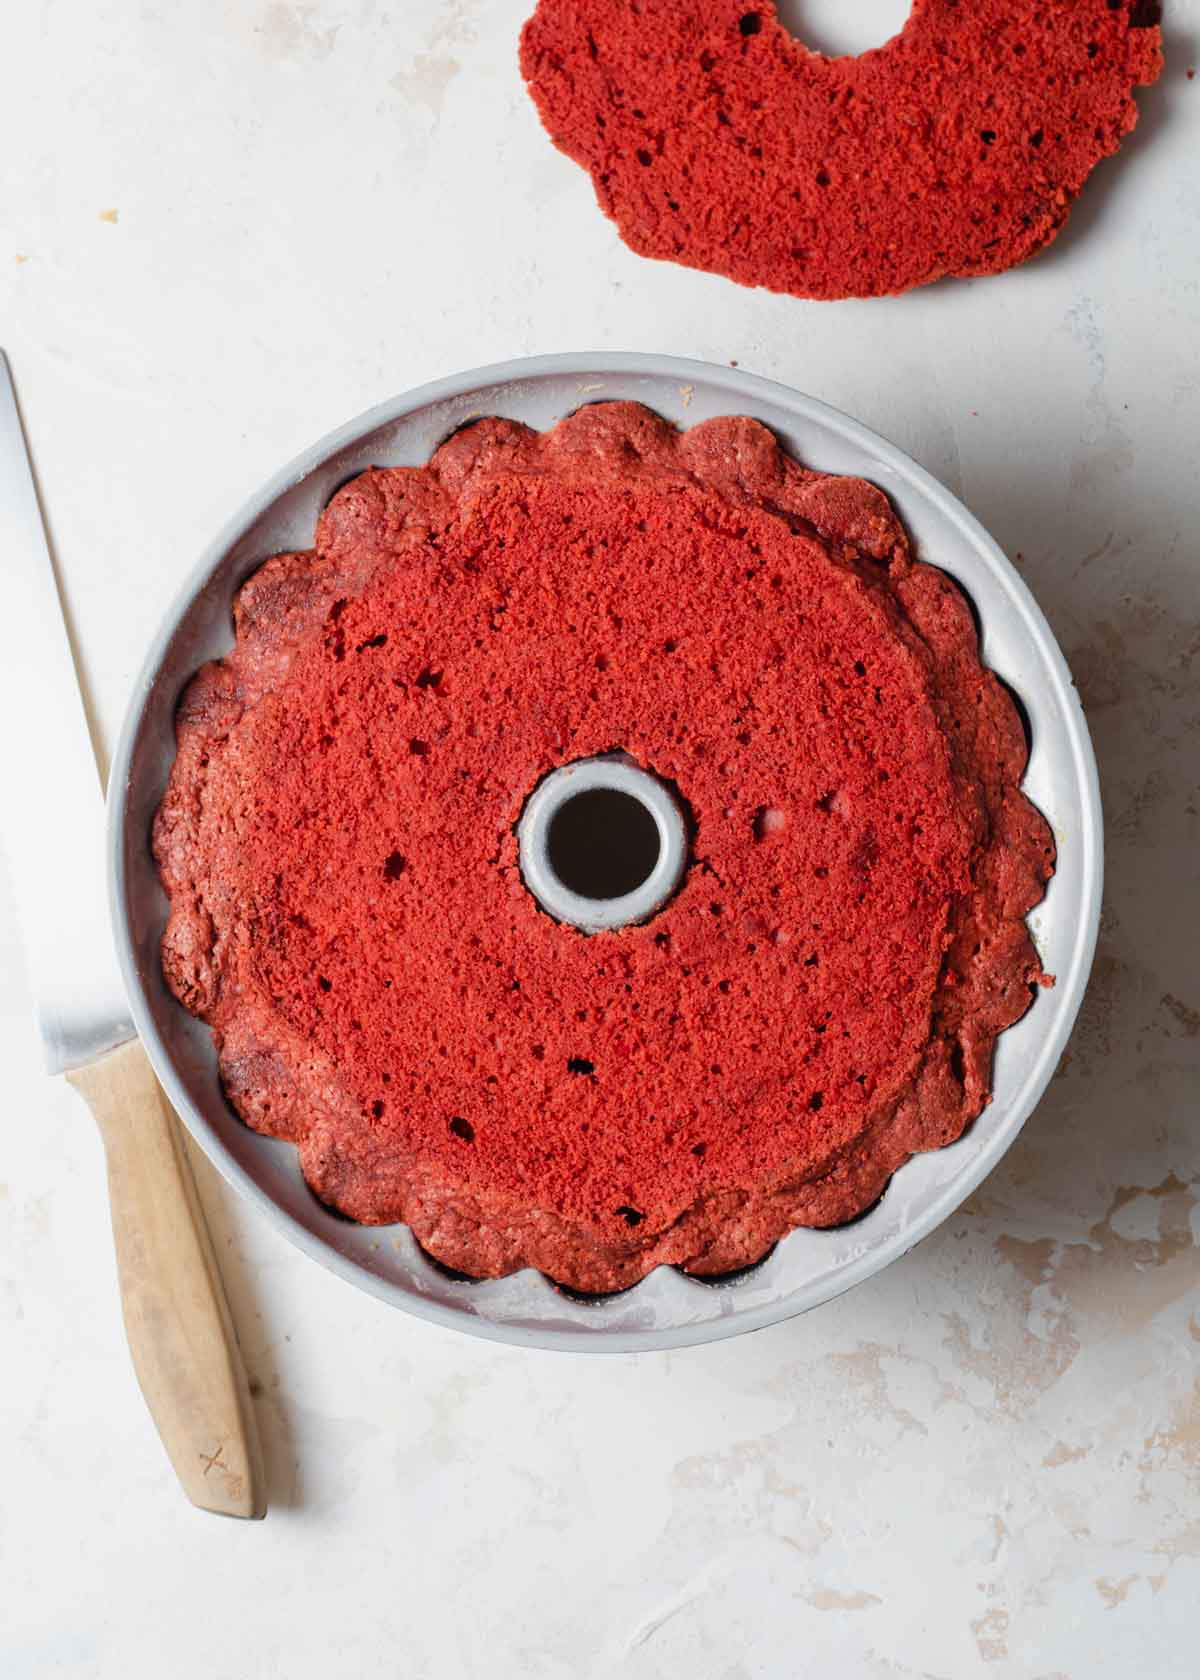 A close up of a sliced open red velvet cake